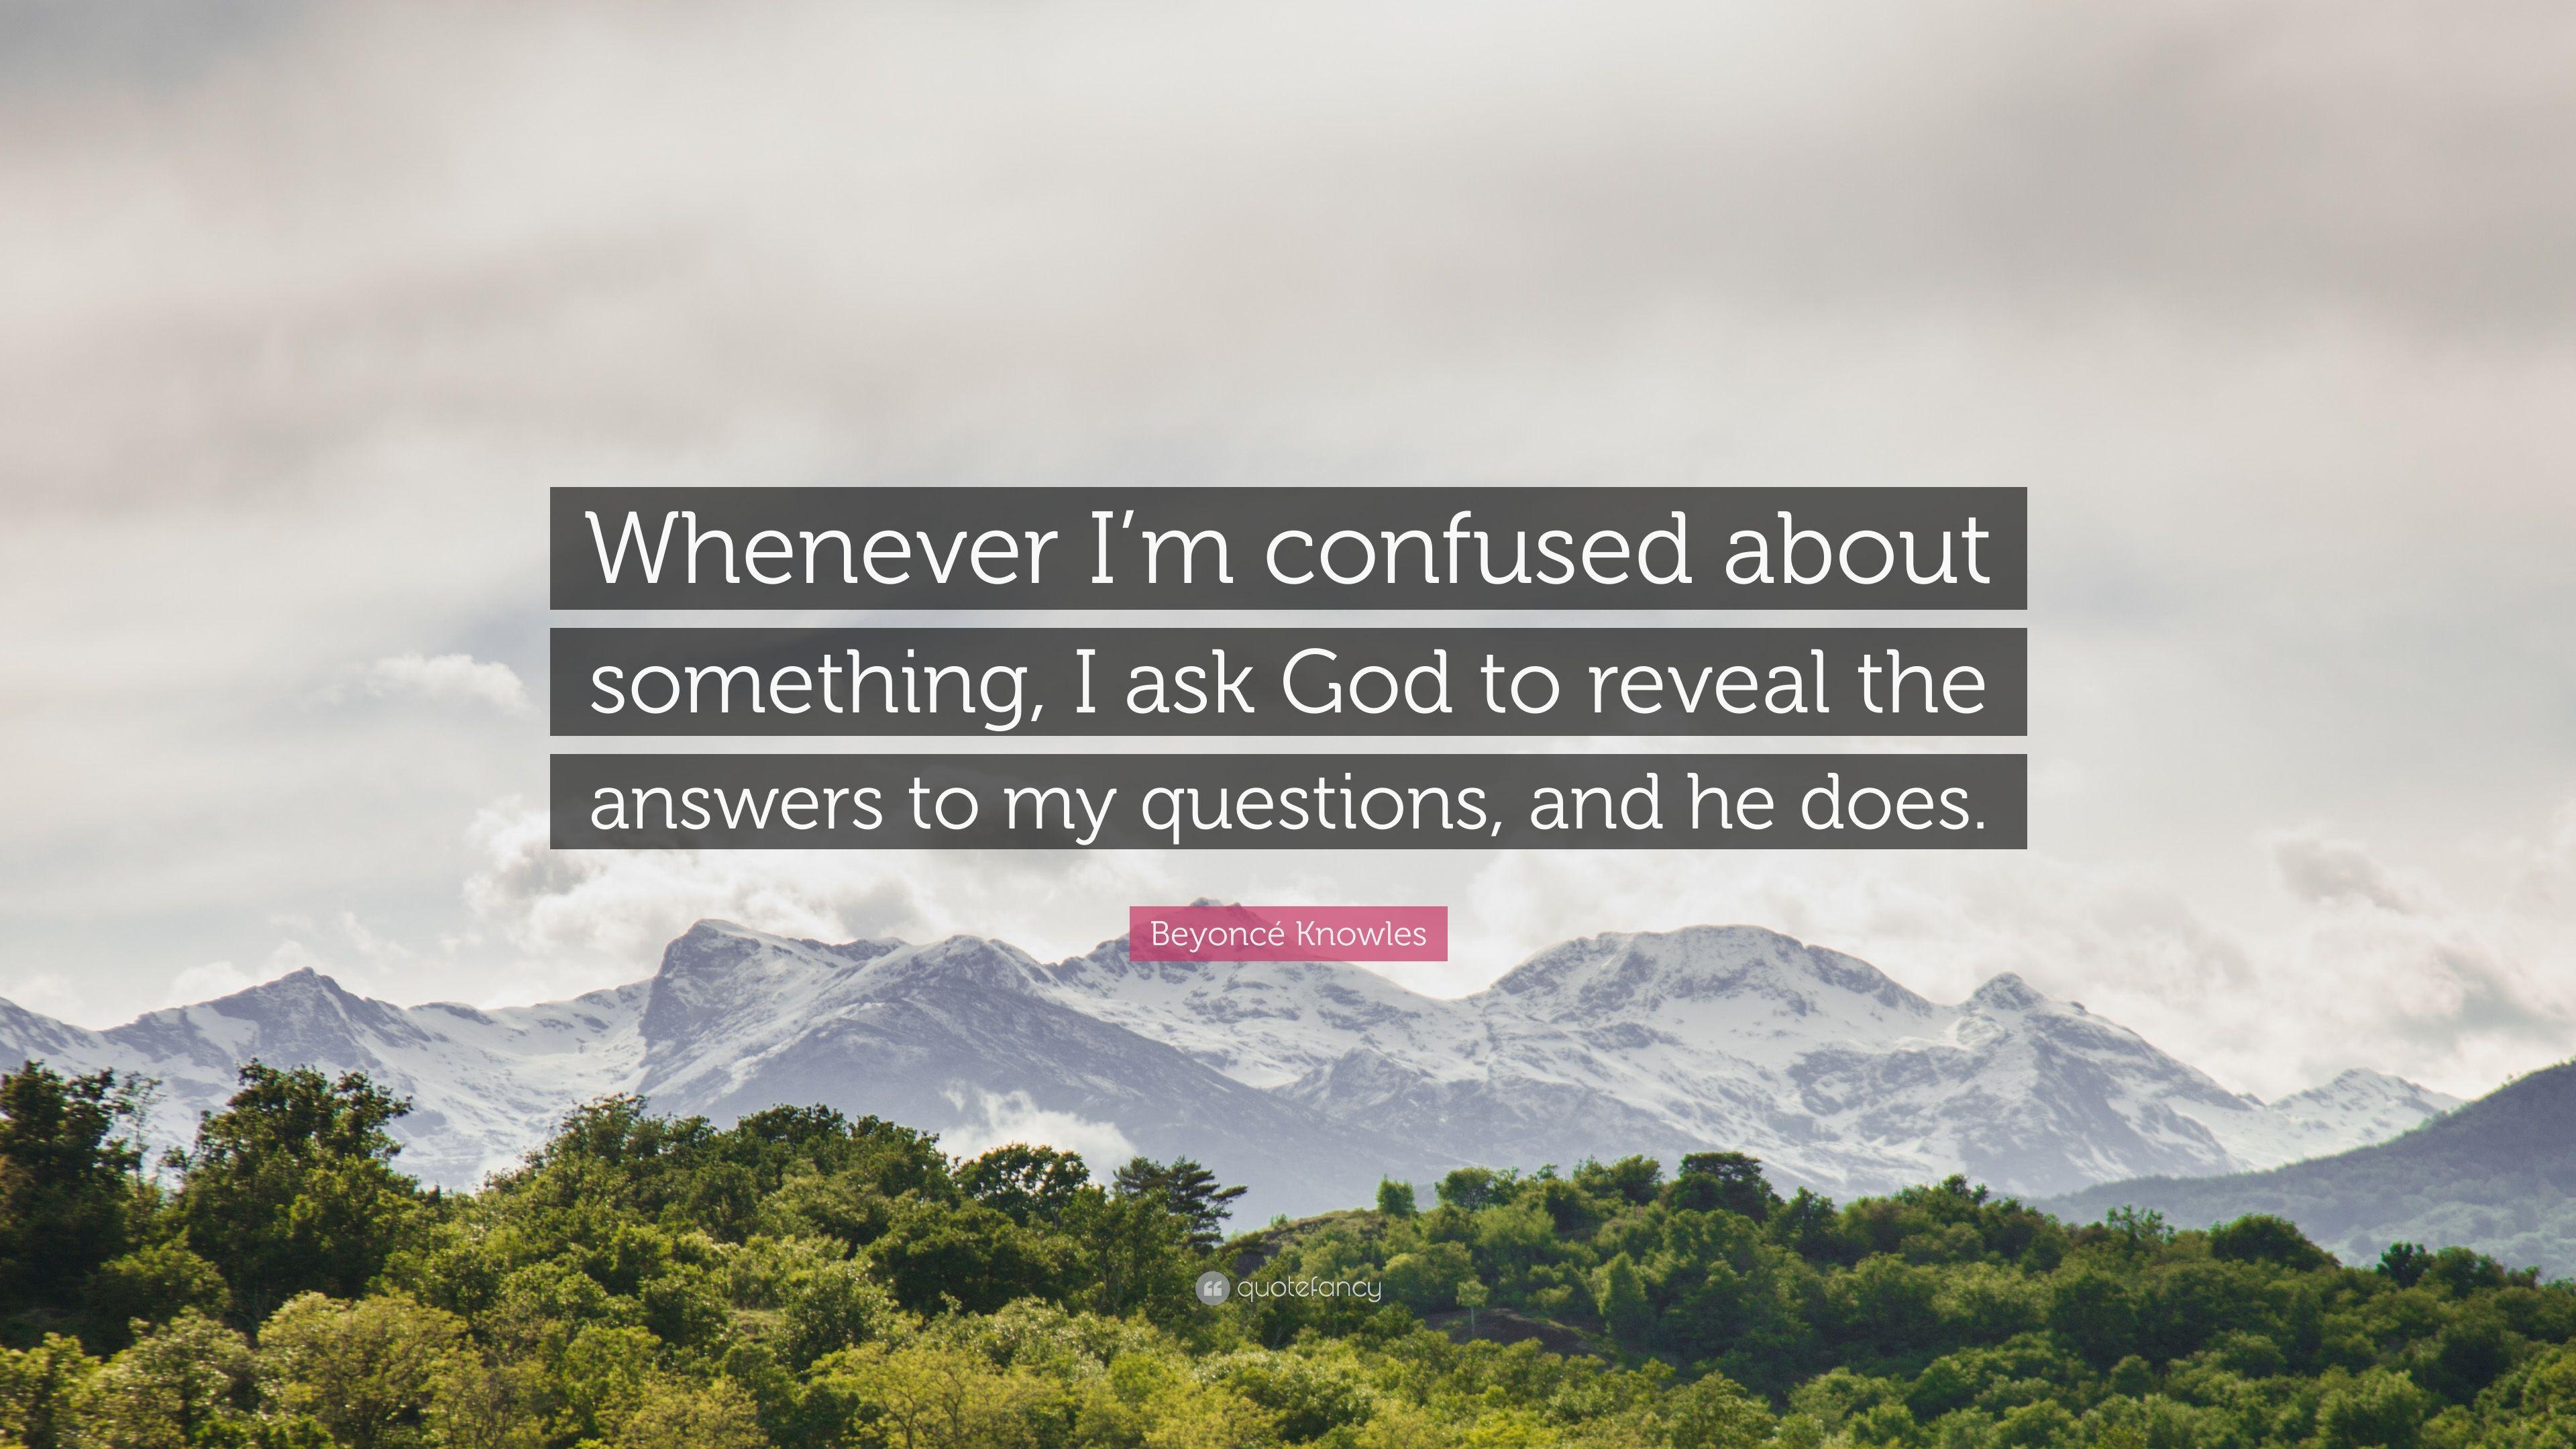 Beyoncé Knowles Quote: “Whenever I'm confused about something, I